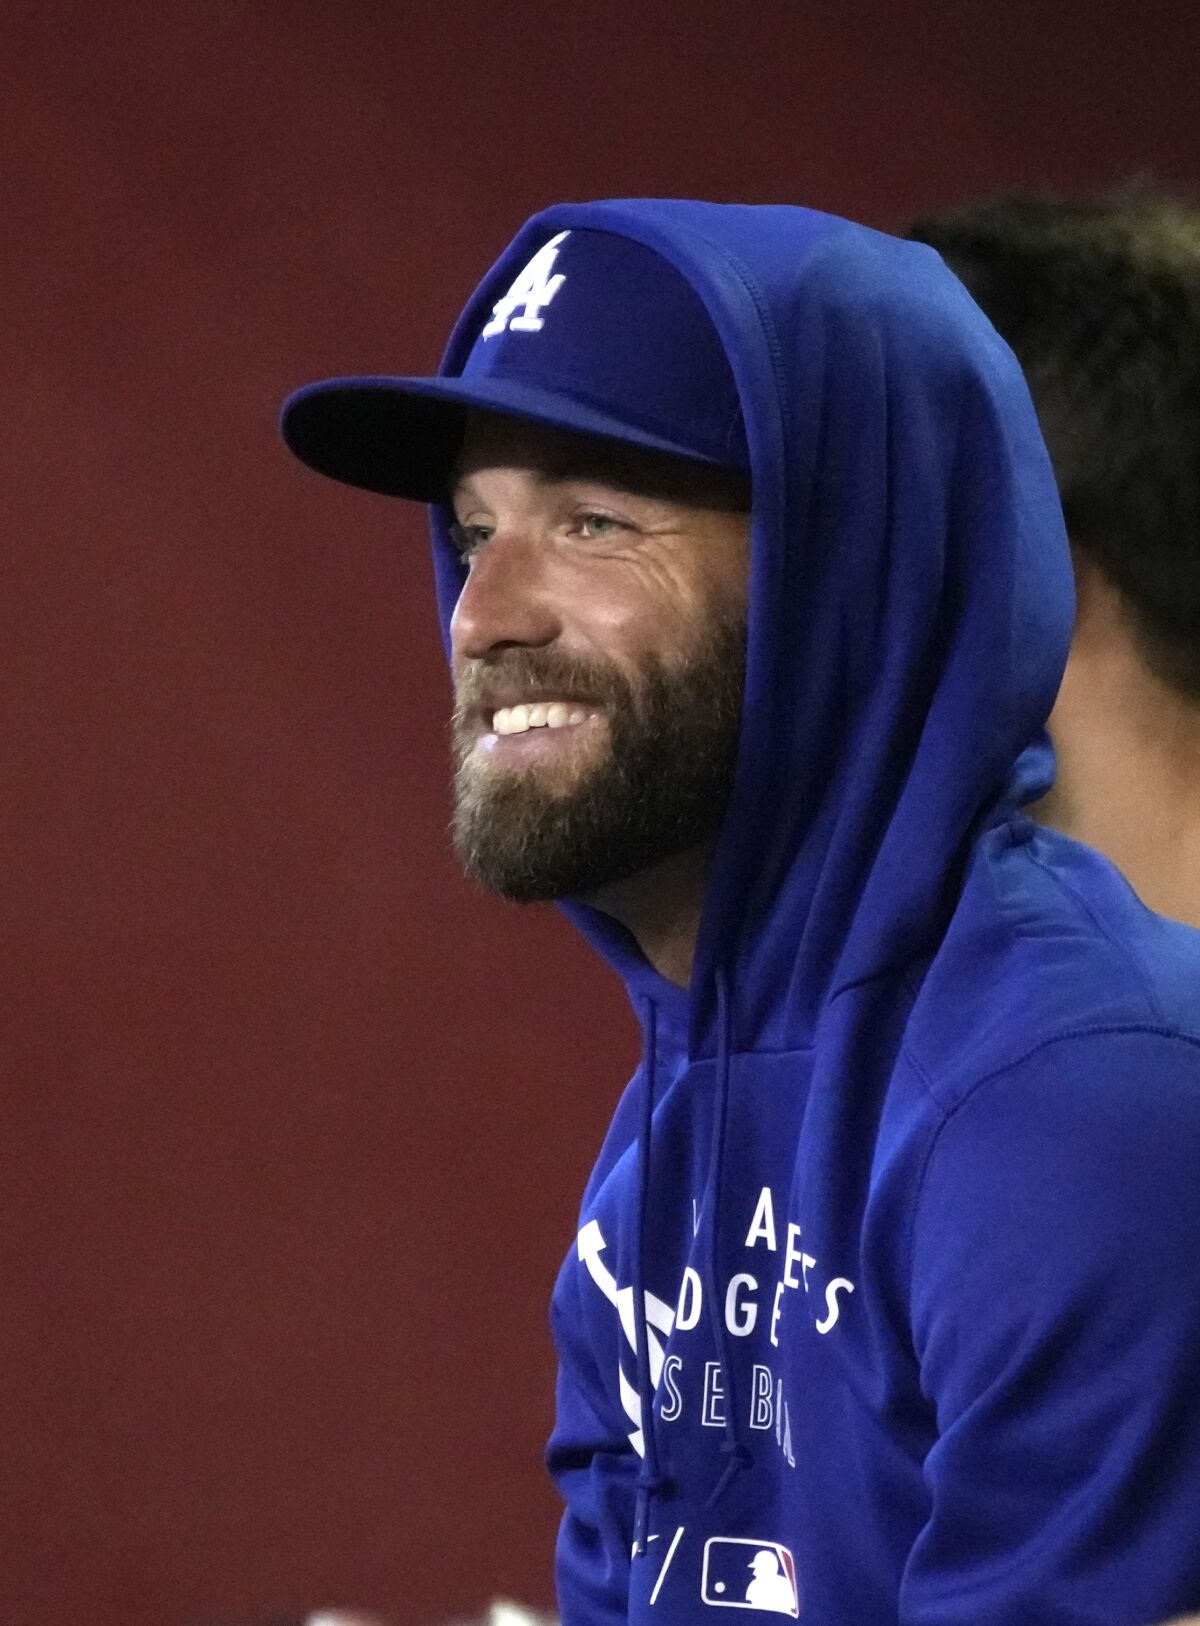 Dodgers' Danny Duffy in the first inning during a game against the Arizona Diamondbacks, Aug 1, 2021, in Phoenix.